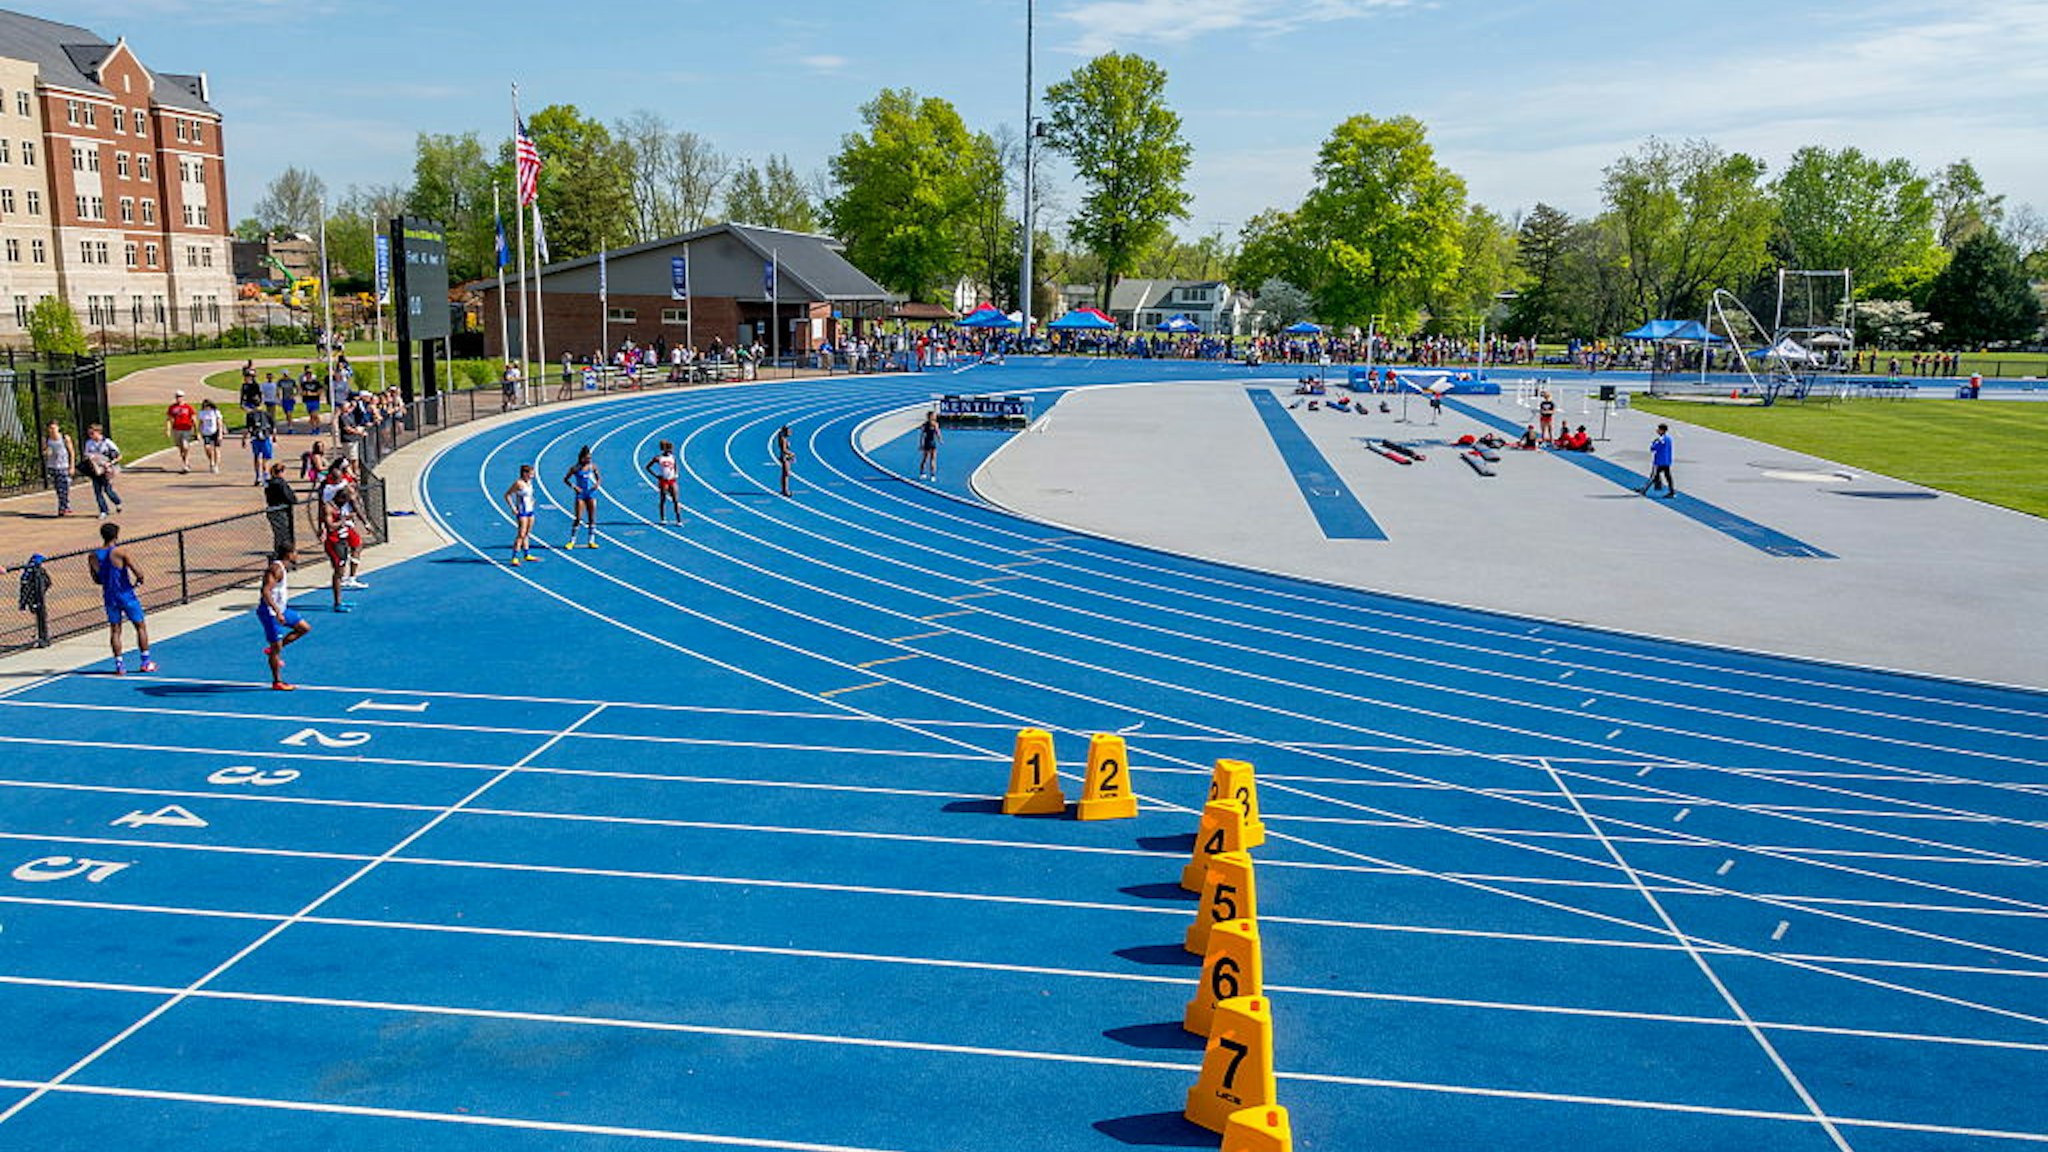 Kentucky Relays held at the University of Kentucky with outdoor track and field competitive events for high school and. (Photo by: Education Images/Universal Images Group via Getty Images)